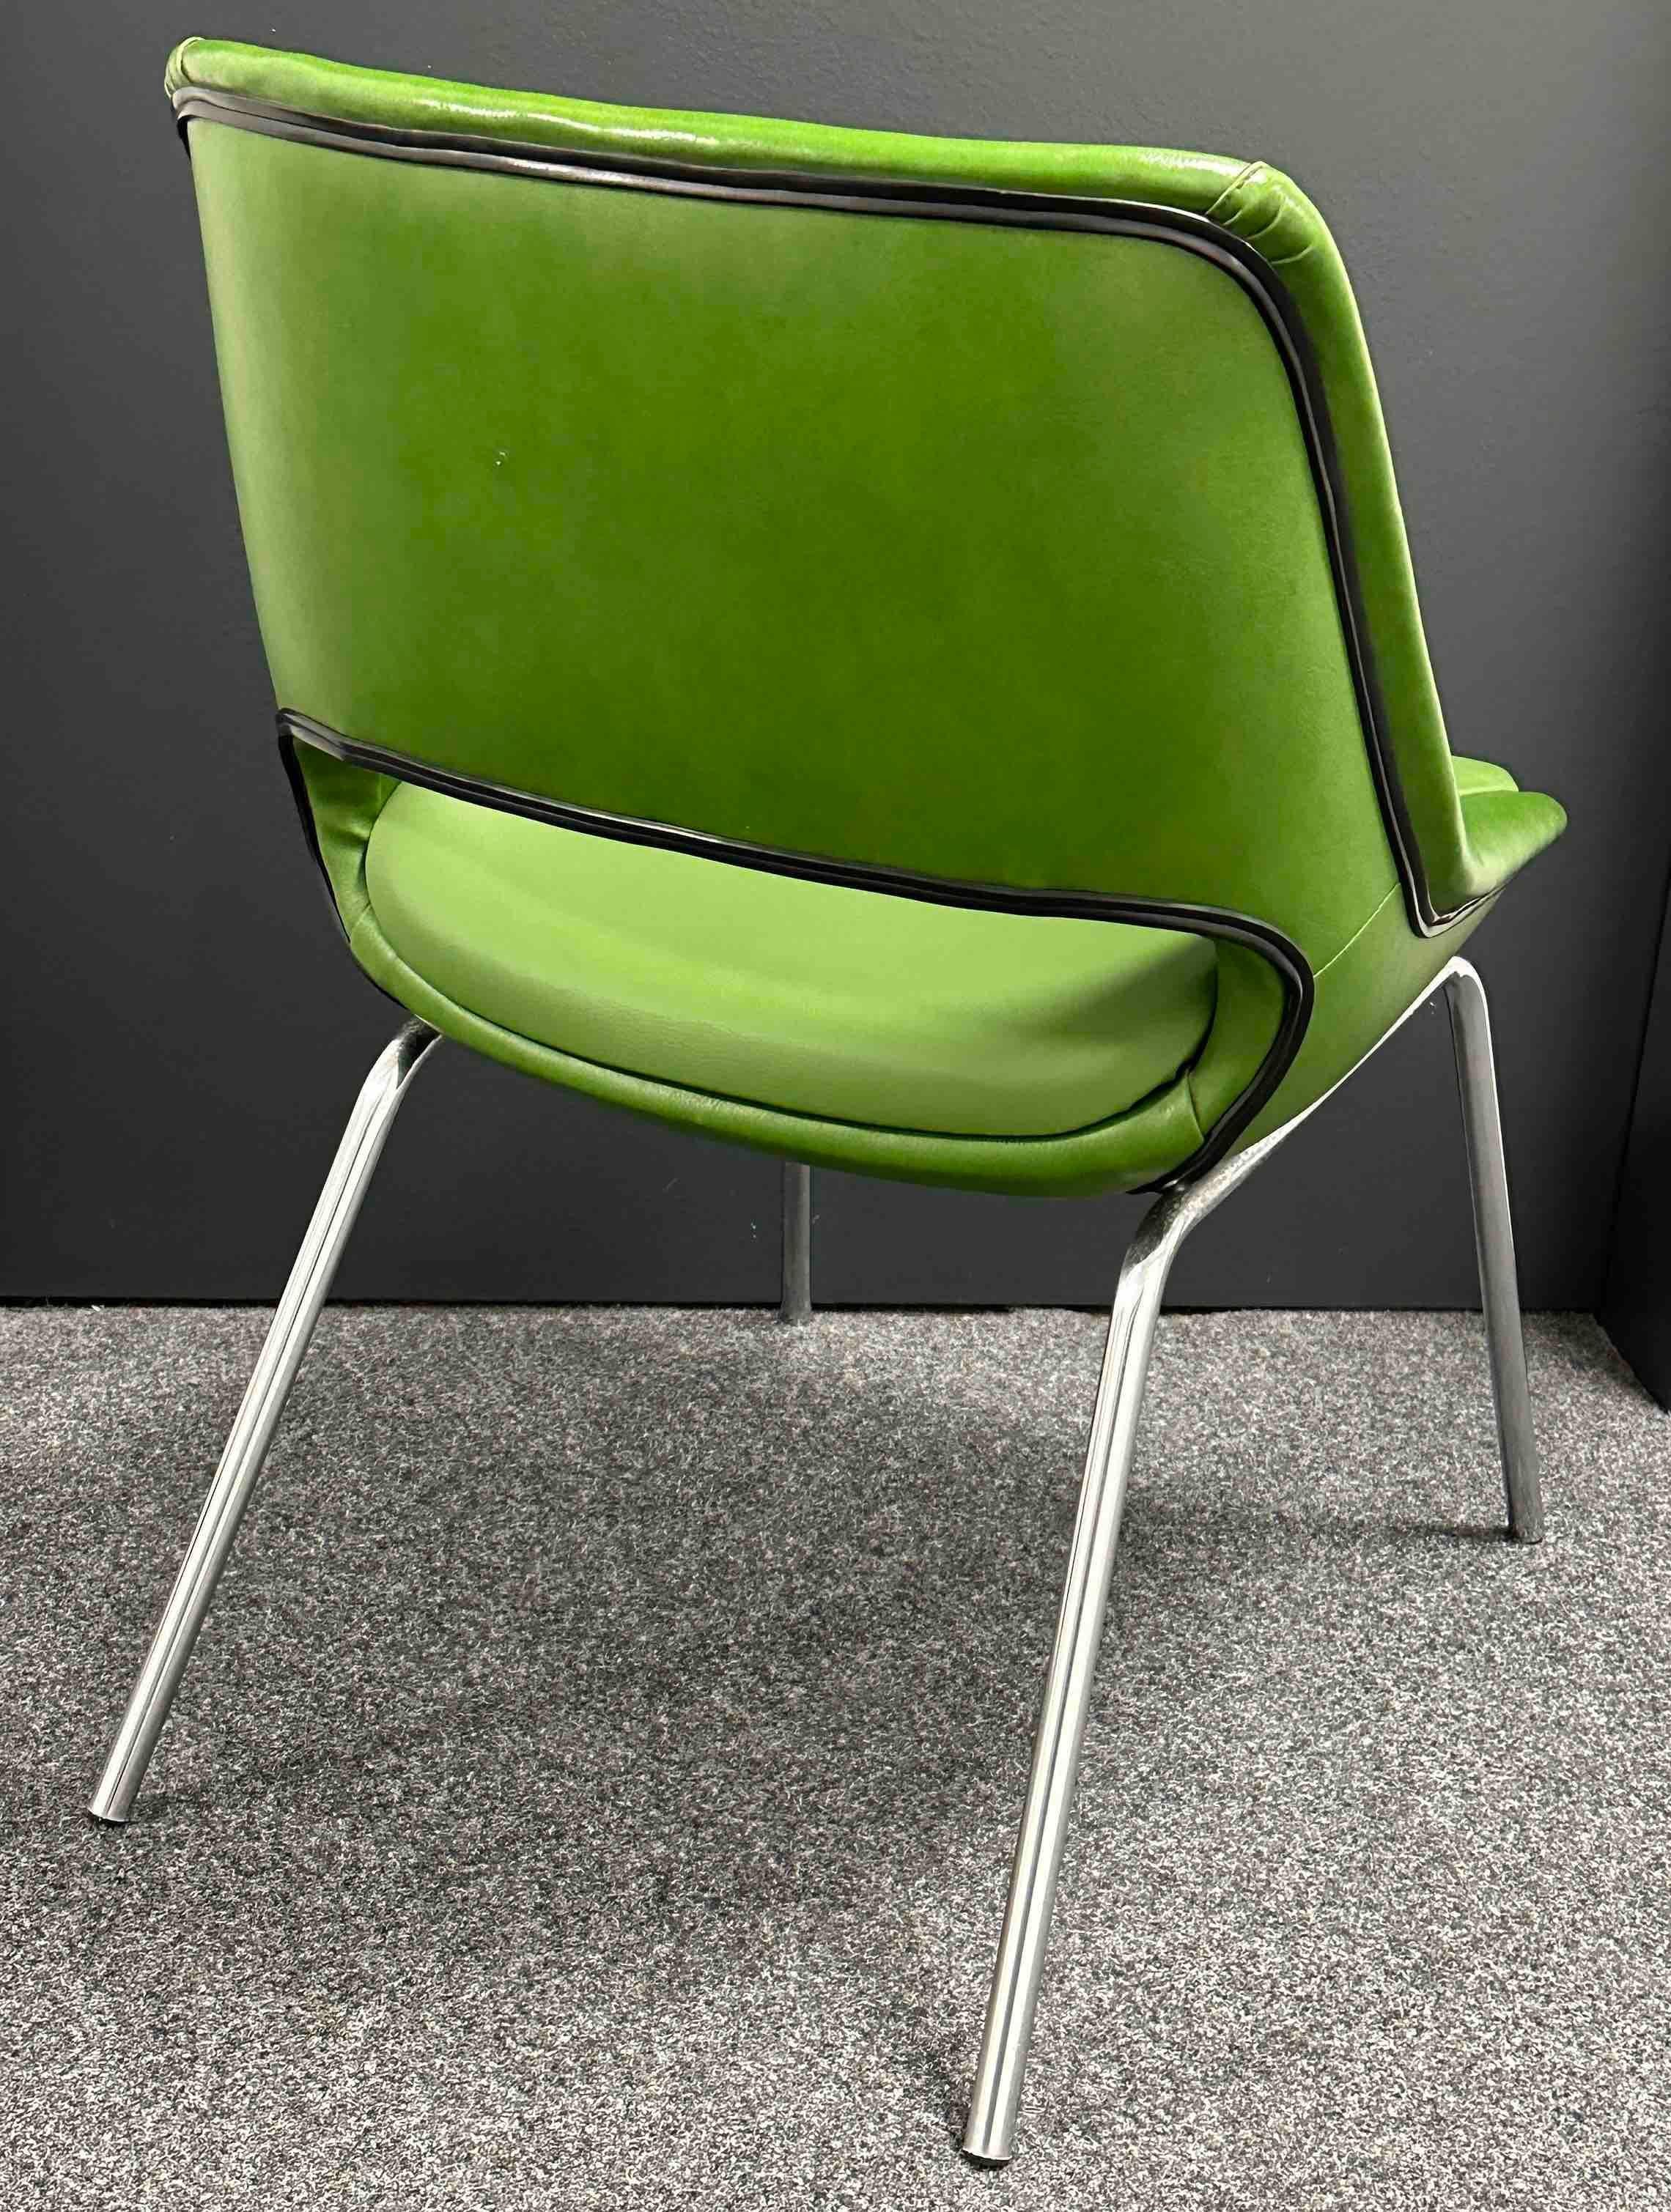 Two Chrome Base, Green Faux Leather Chairs Made by Blaha, Austria, 1970s For Sale 5